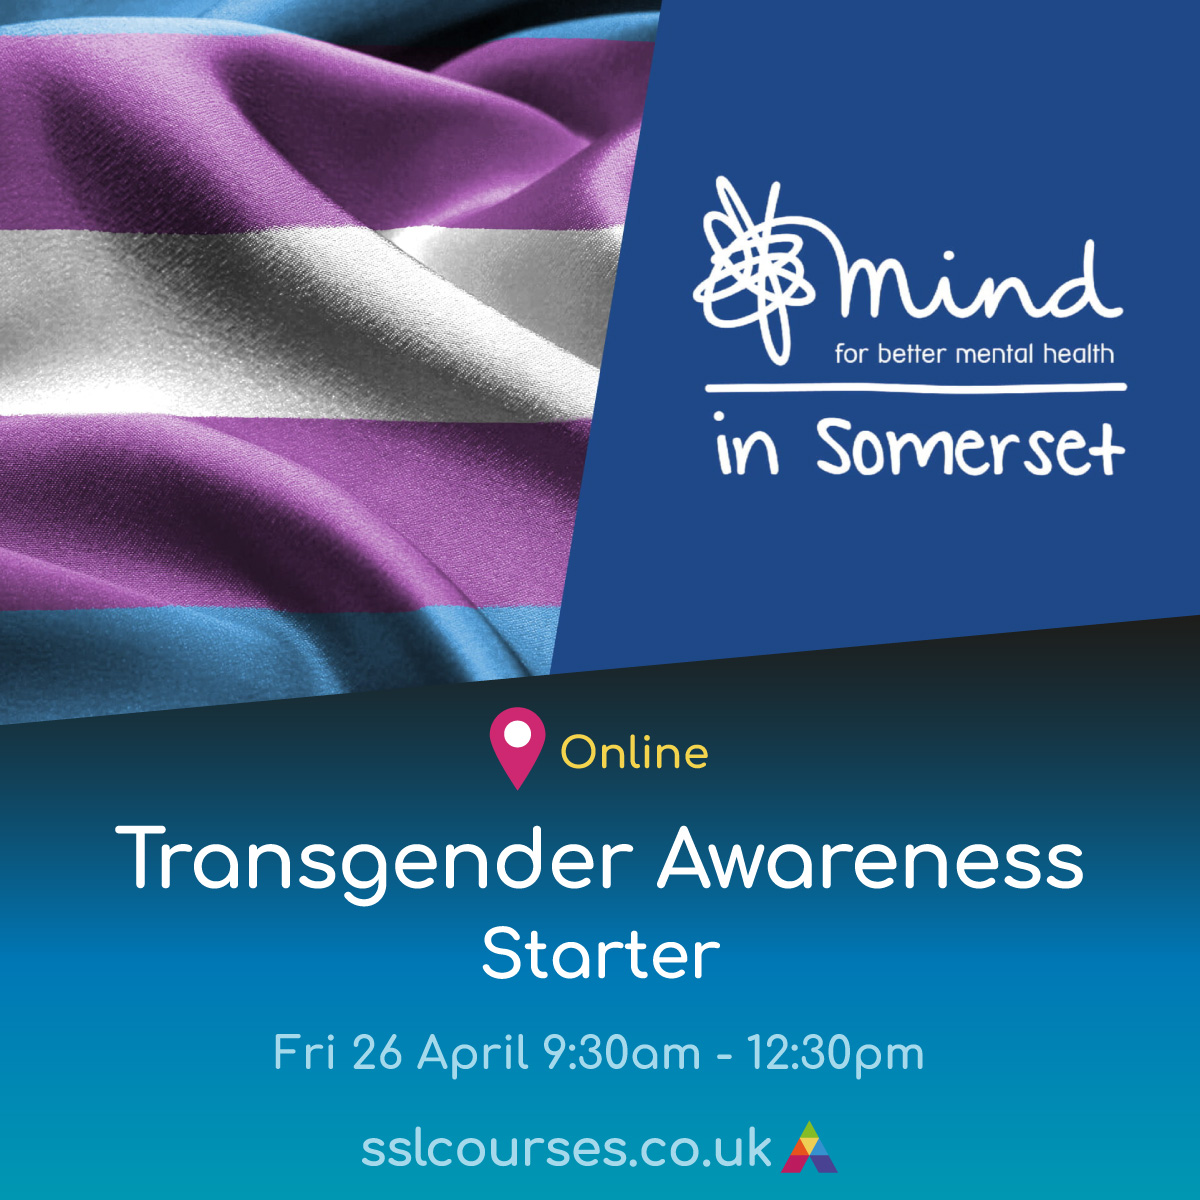 Transgender Awareness - Starter - Online Course 💻 This workshop is in partnership with @MindinSomerset and offers insights into the challenges faced by the transgender community, and explores ways in which society can be more inclusive. Find out more: sslcourses.co.uk/courses/course…